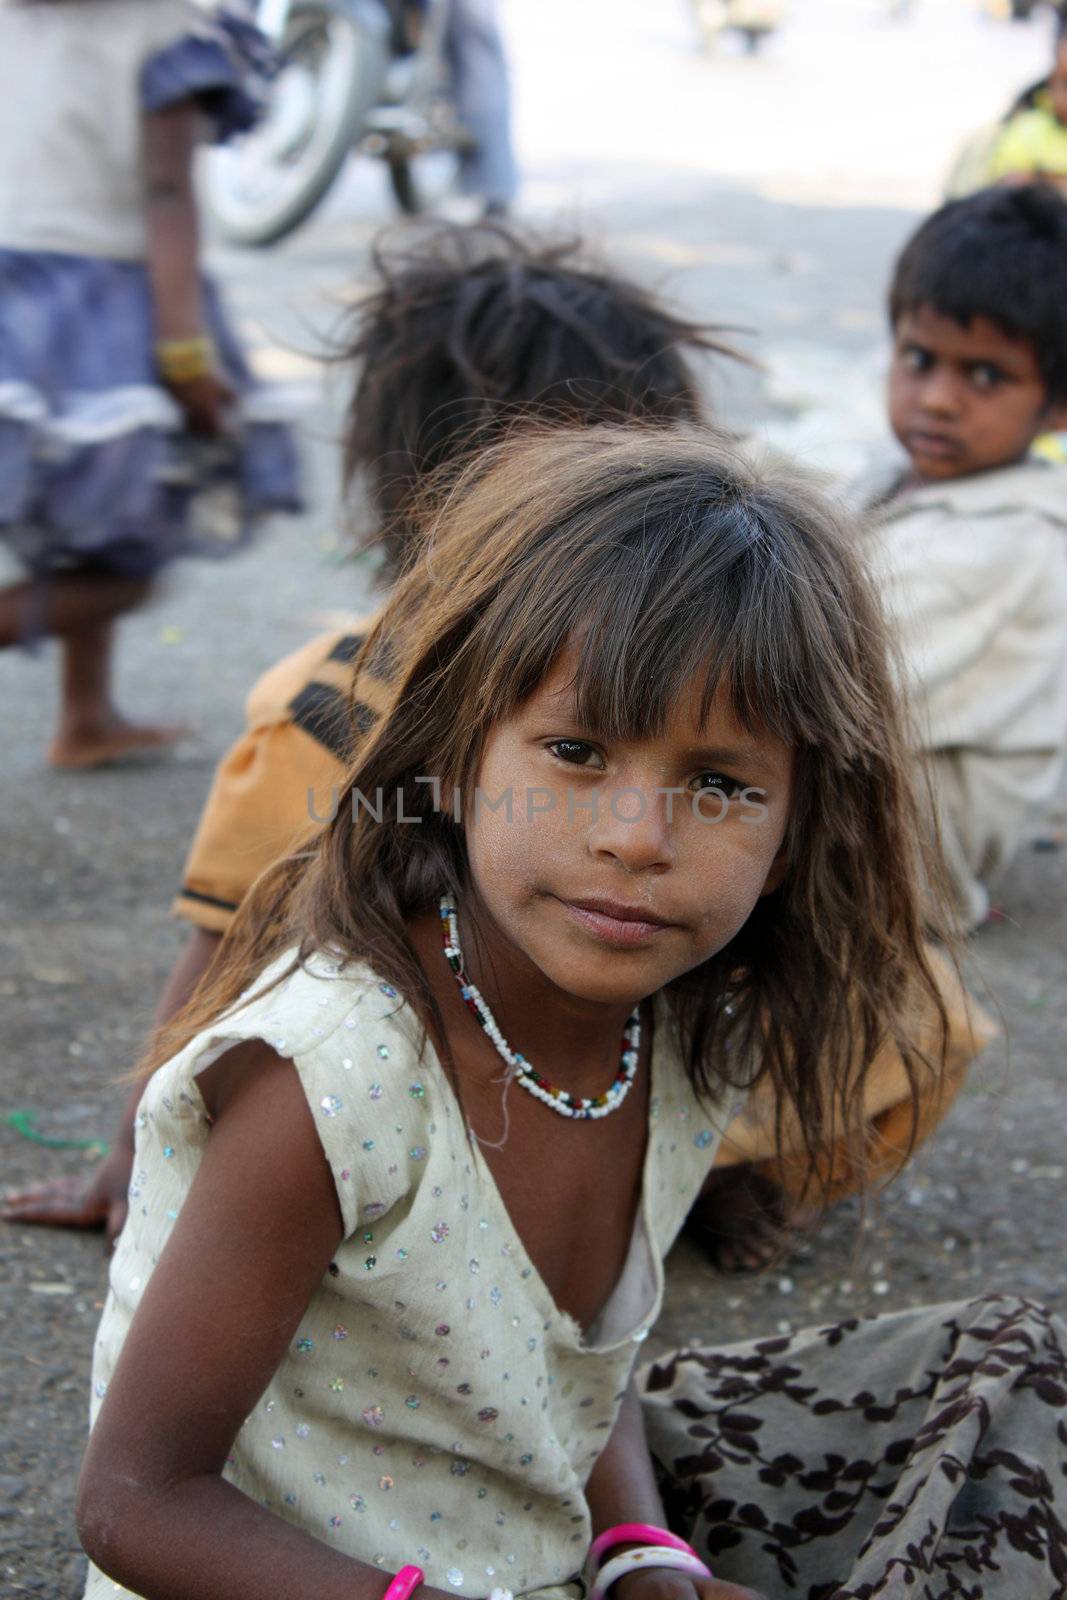 A portrait of an inquisitive beggar girl from India, sitting on the street-side.